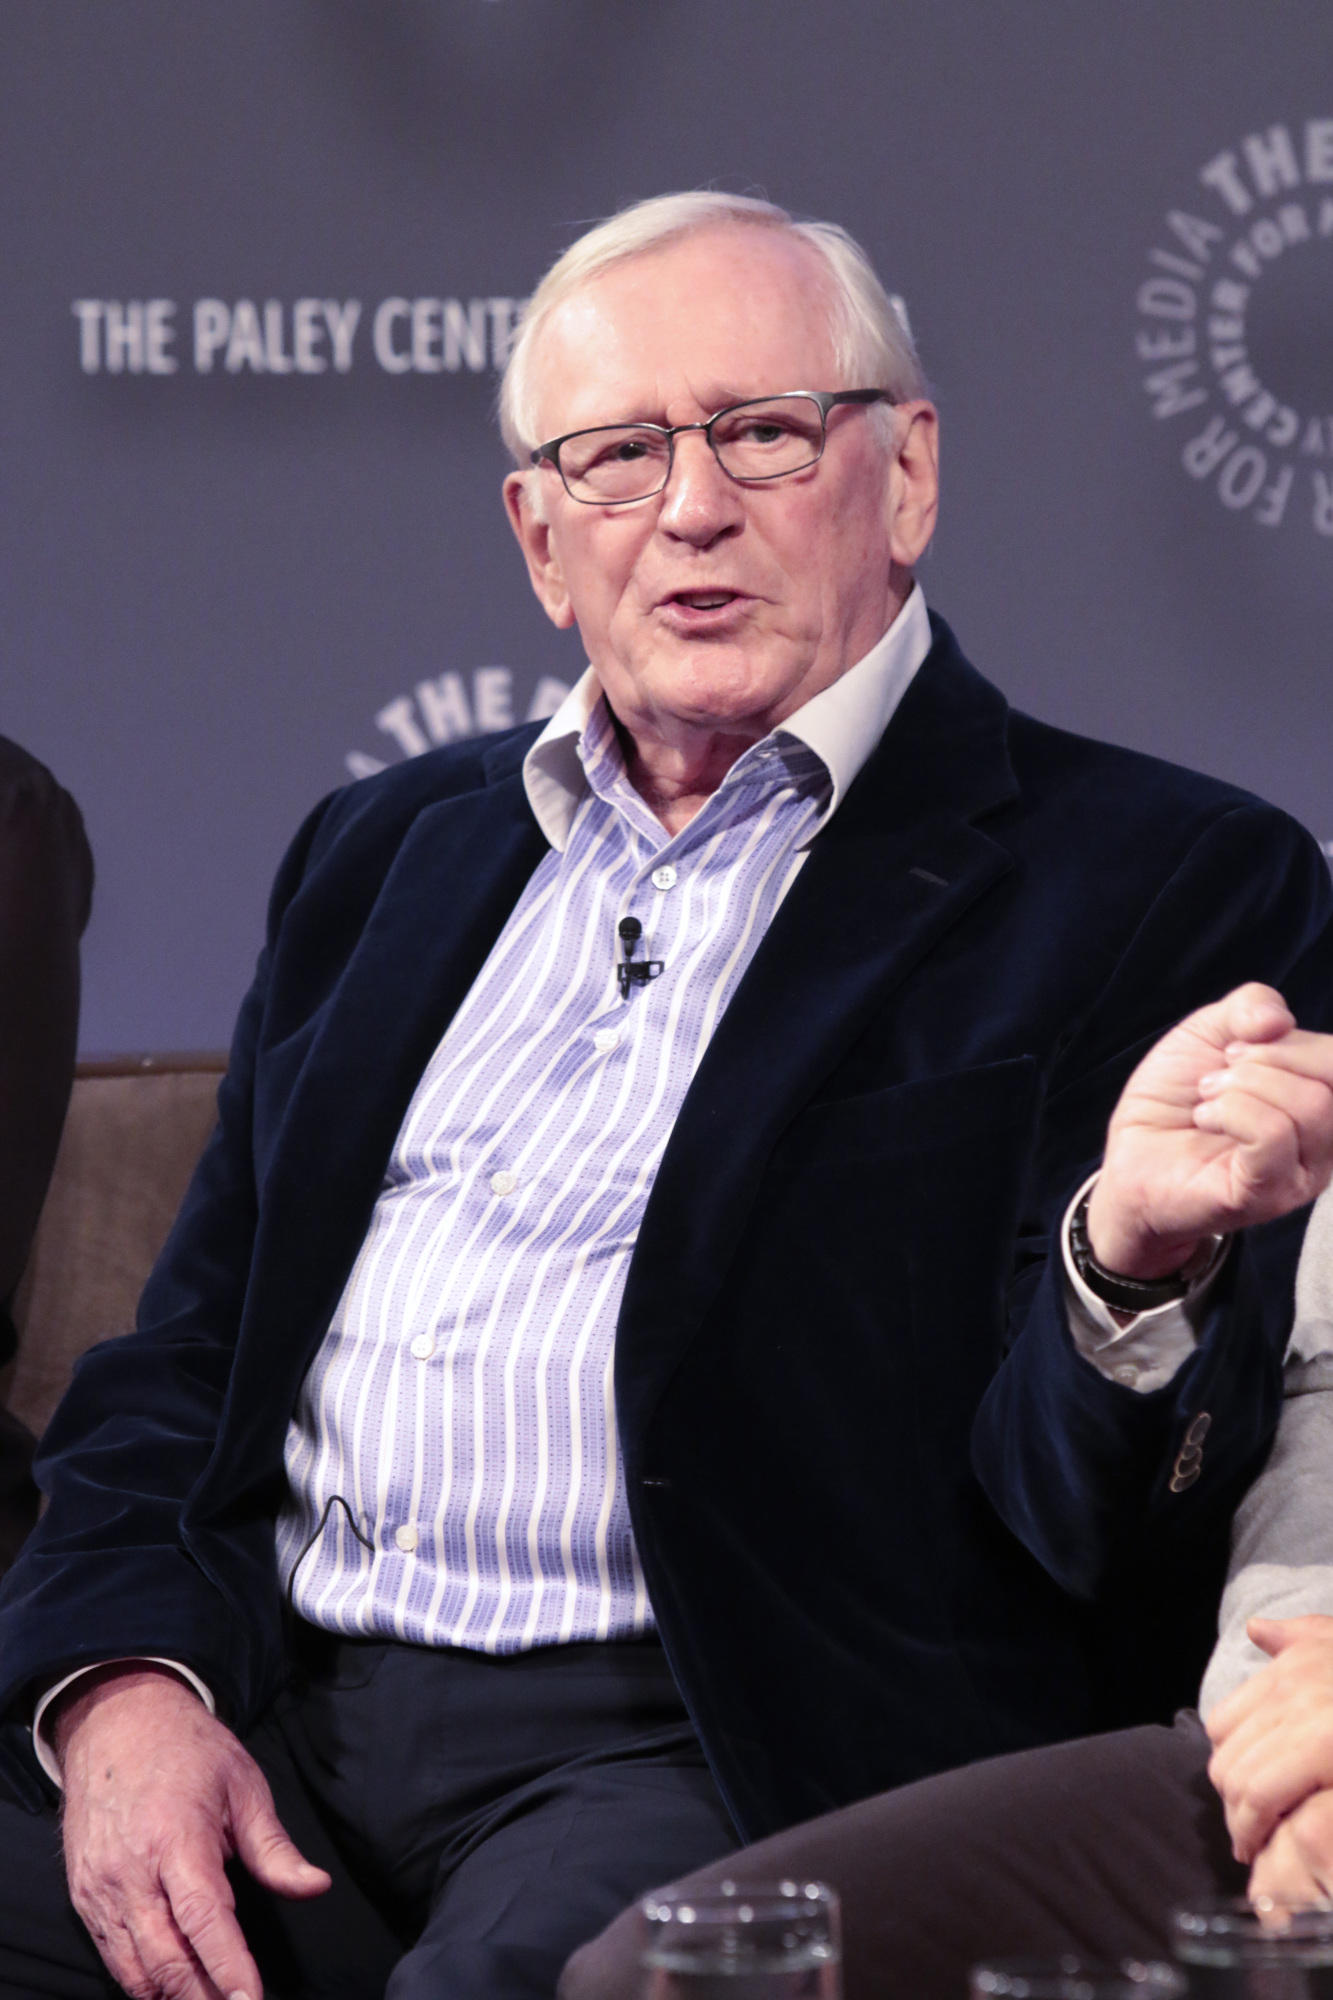 15. Len Cariou expressing his thoughts on the show.